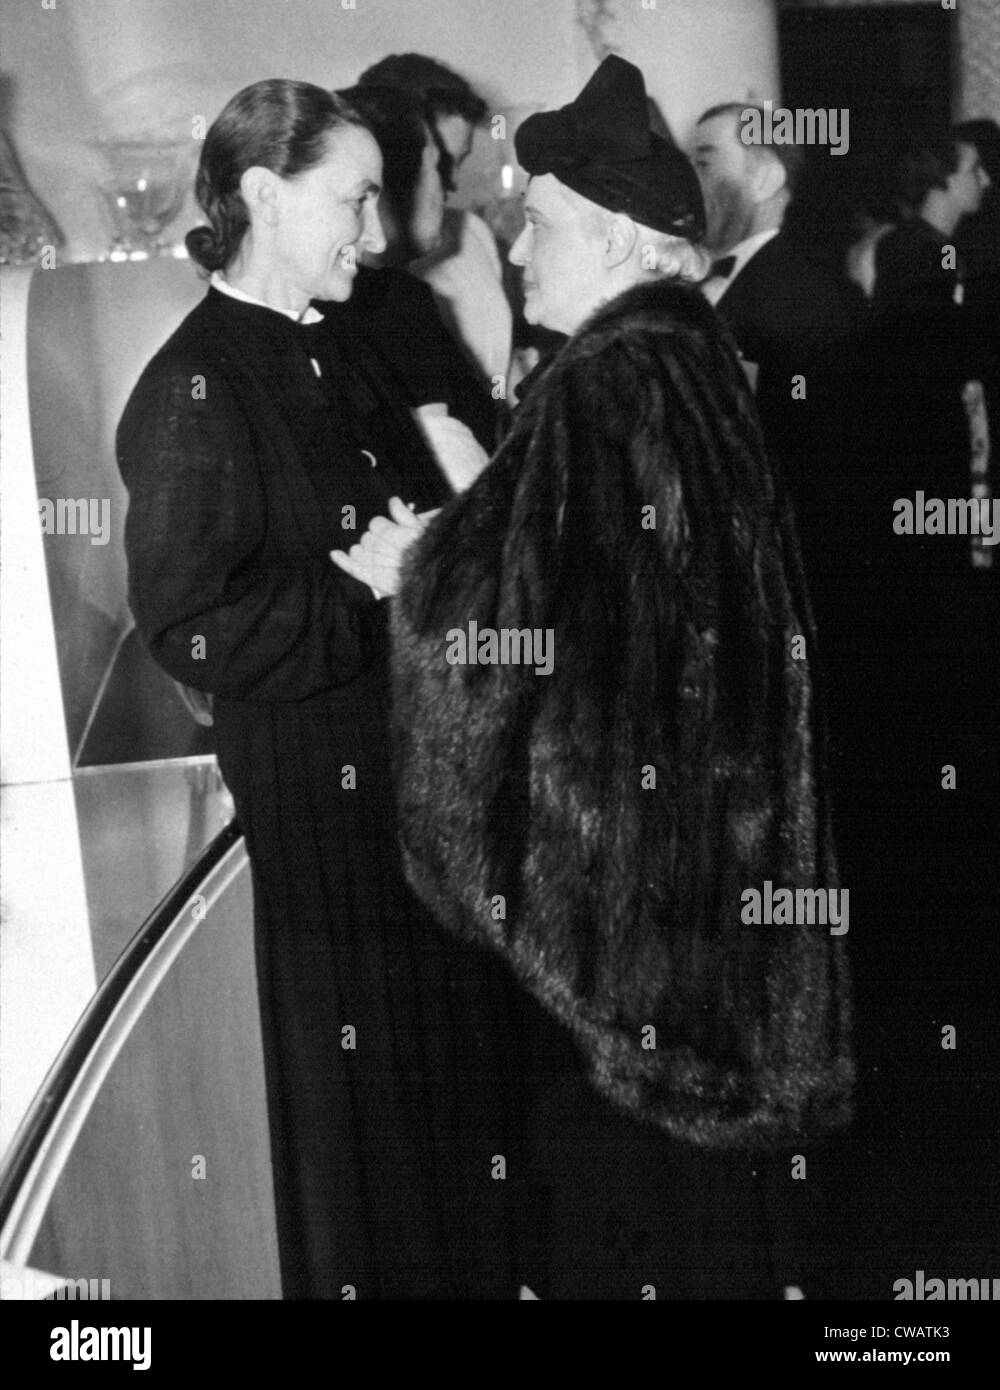 GEORGIA O'KEEFFE, greeting Mrs. Chester Dale, a well-known art collector, January, 1940.  Photo courtesy: Everett/CSU Archives. Stock Photo